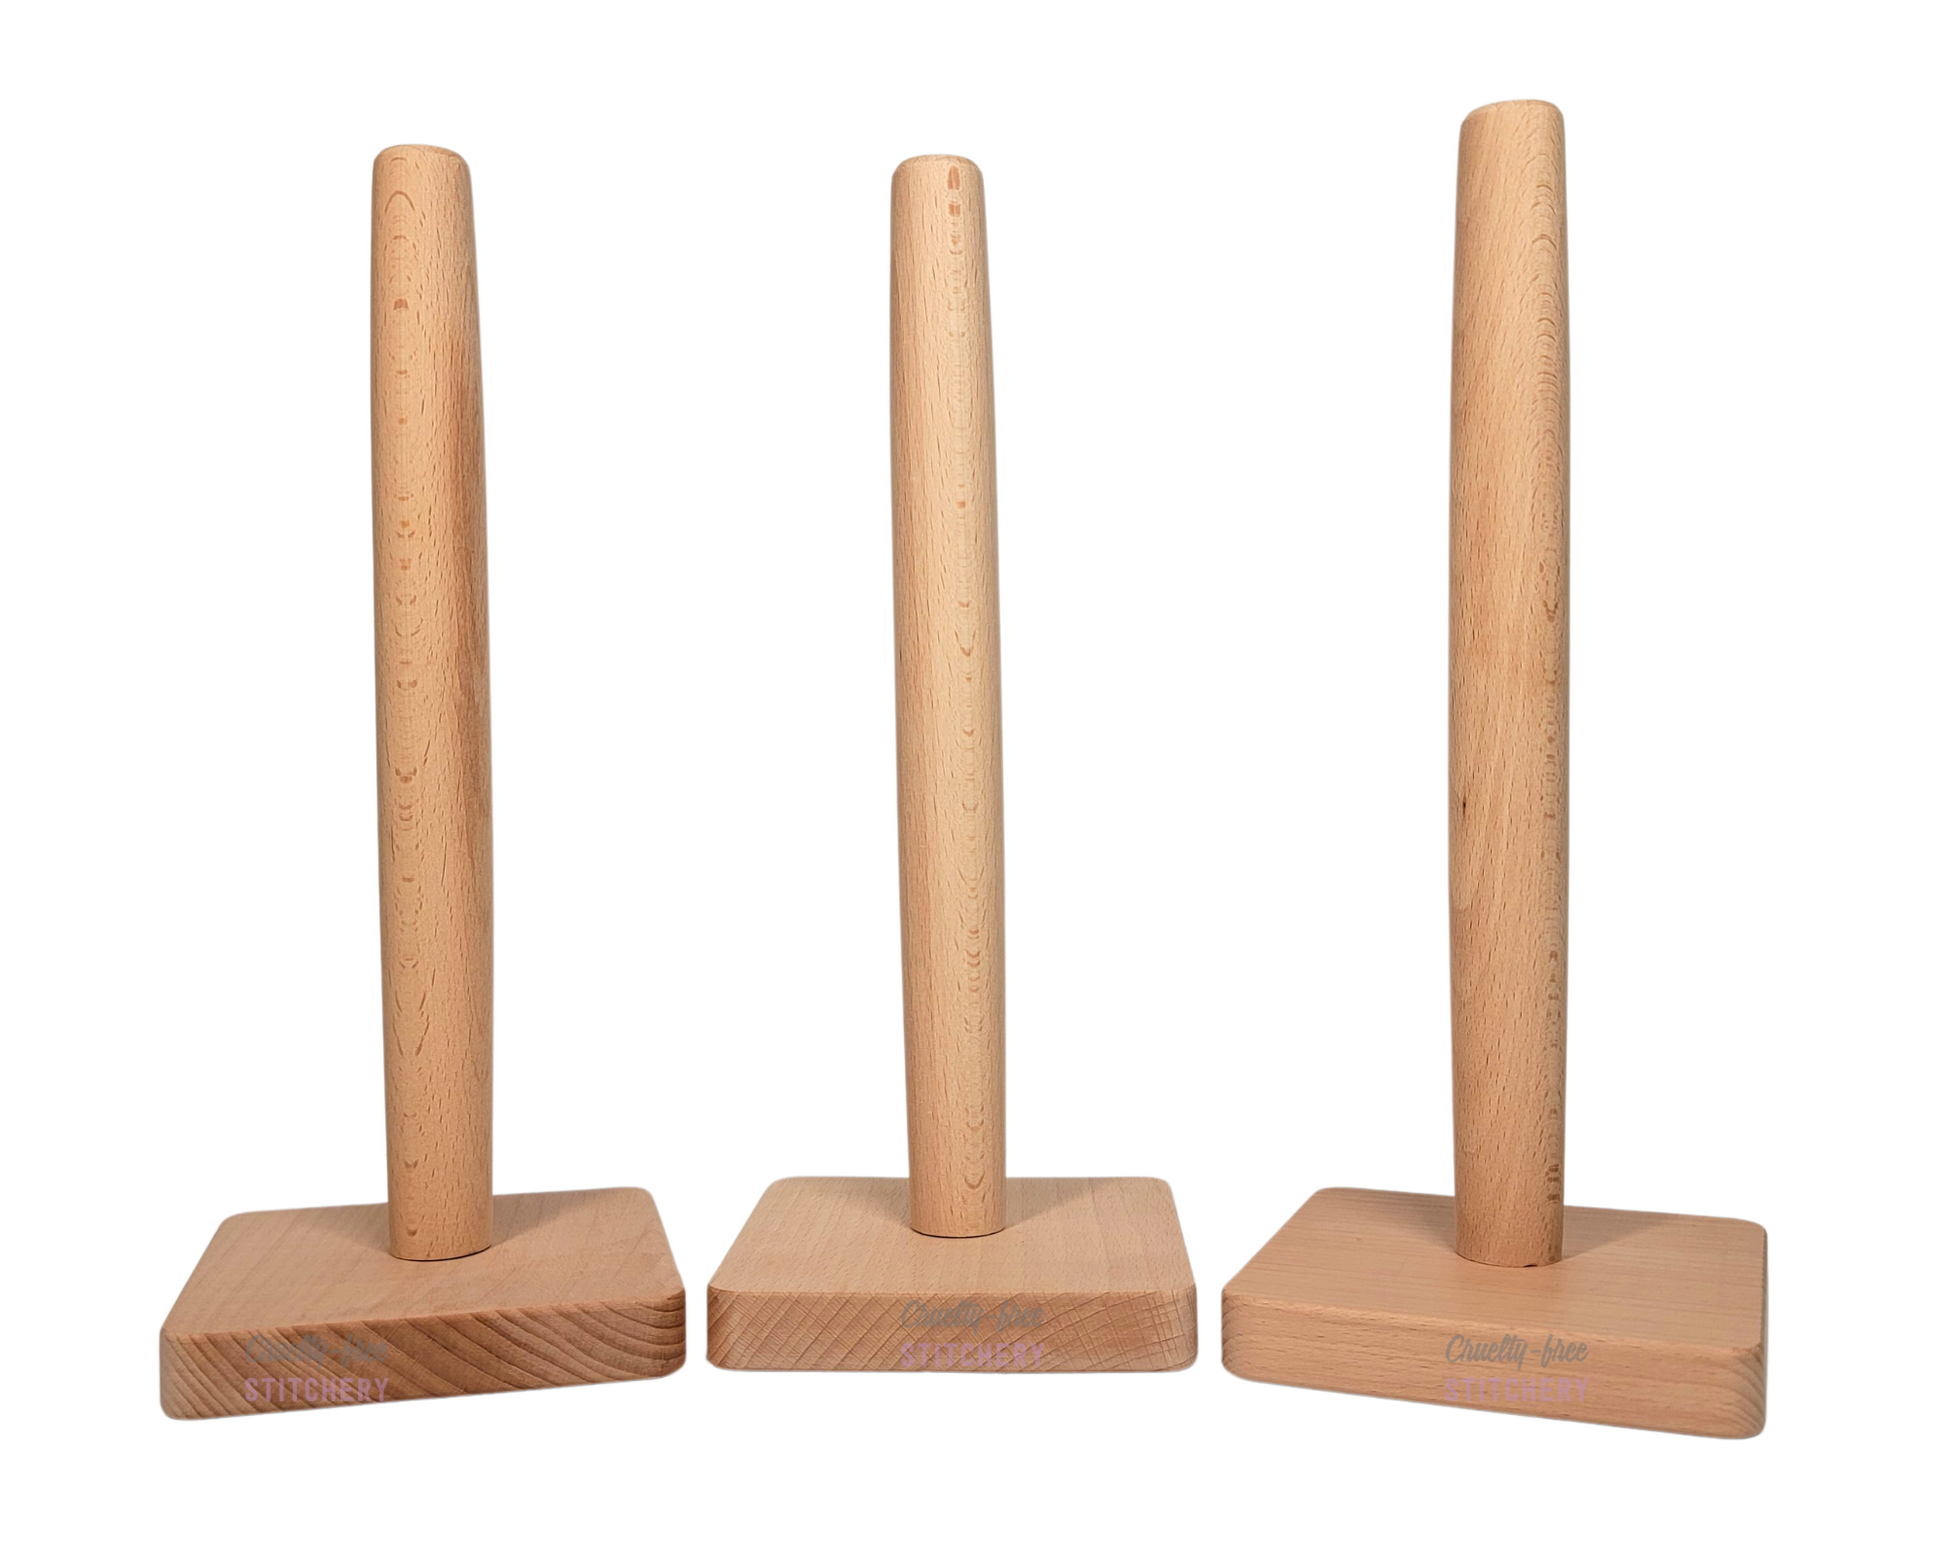 Three NonPaper Towel Holders, they are a light colored wood with a square base that has rounded corners, and a dowel in the center that is slightly wider in the middle of its length.